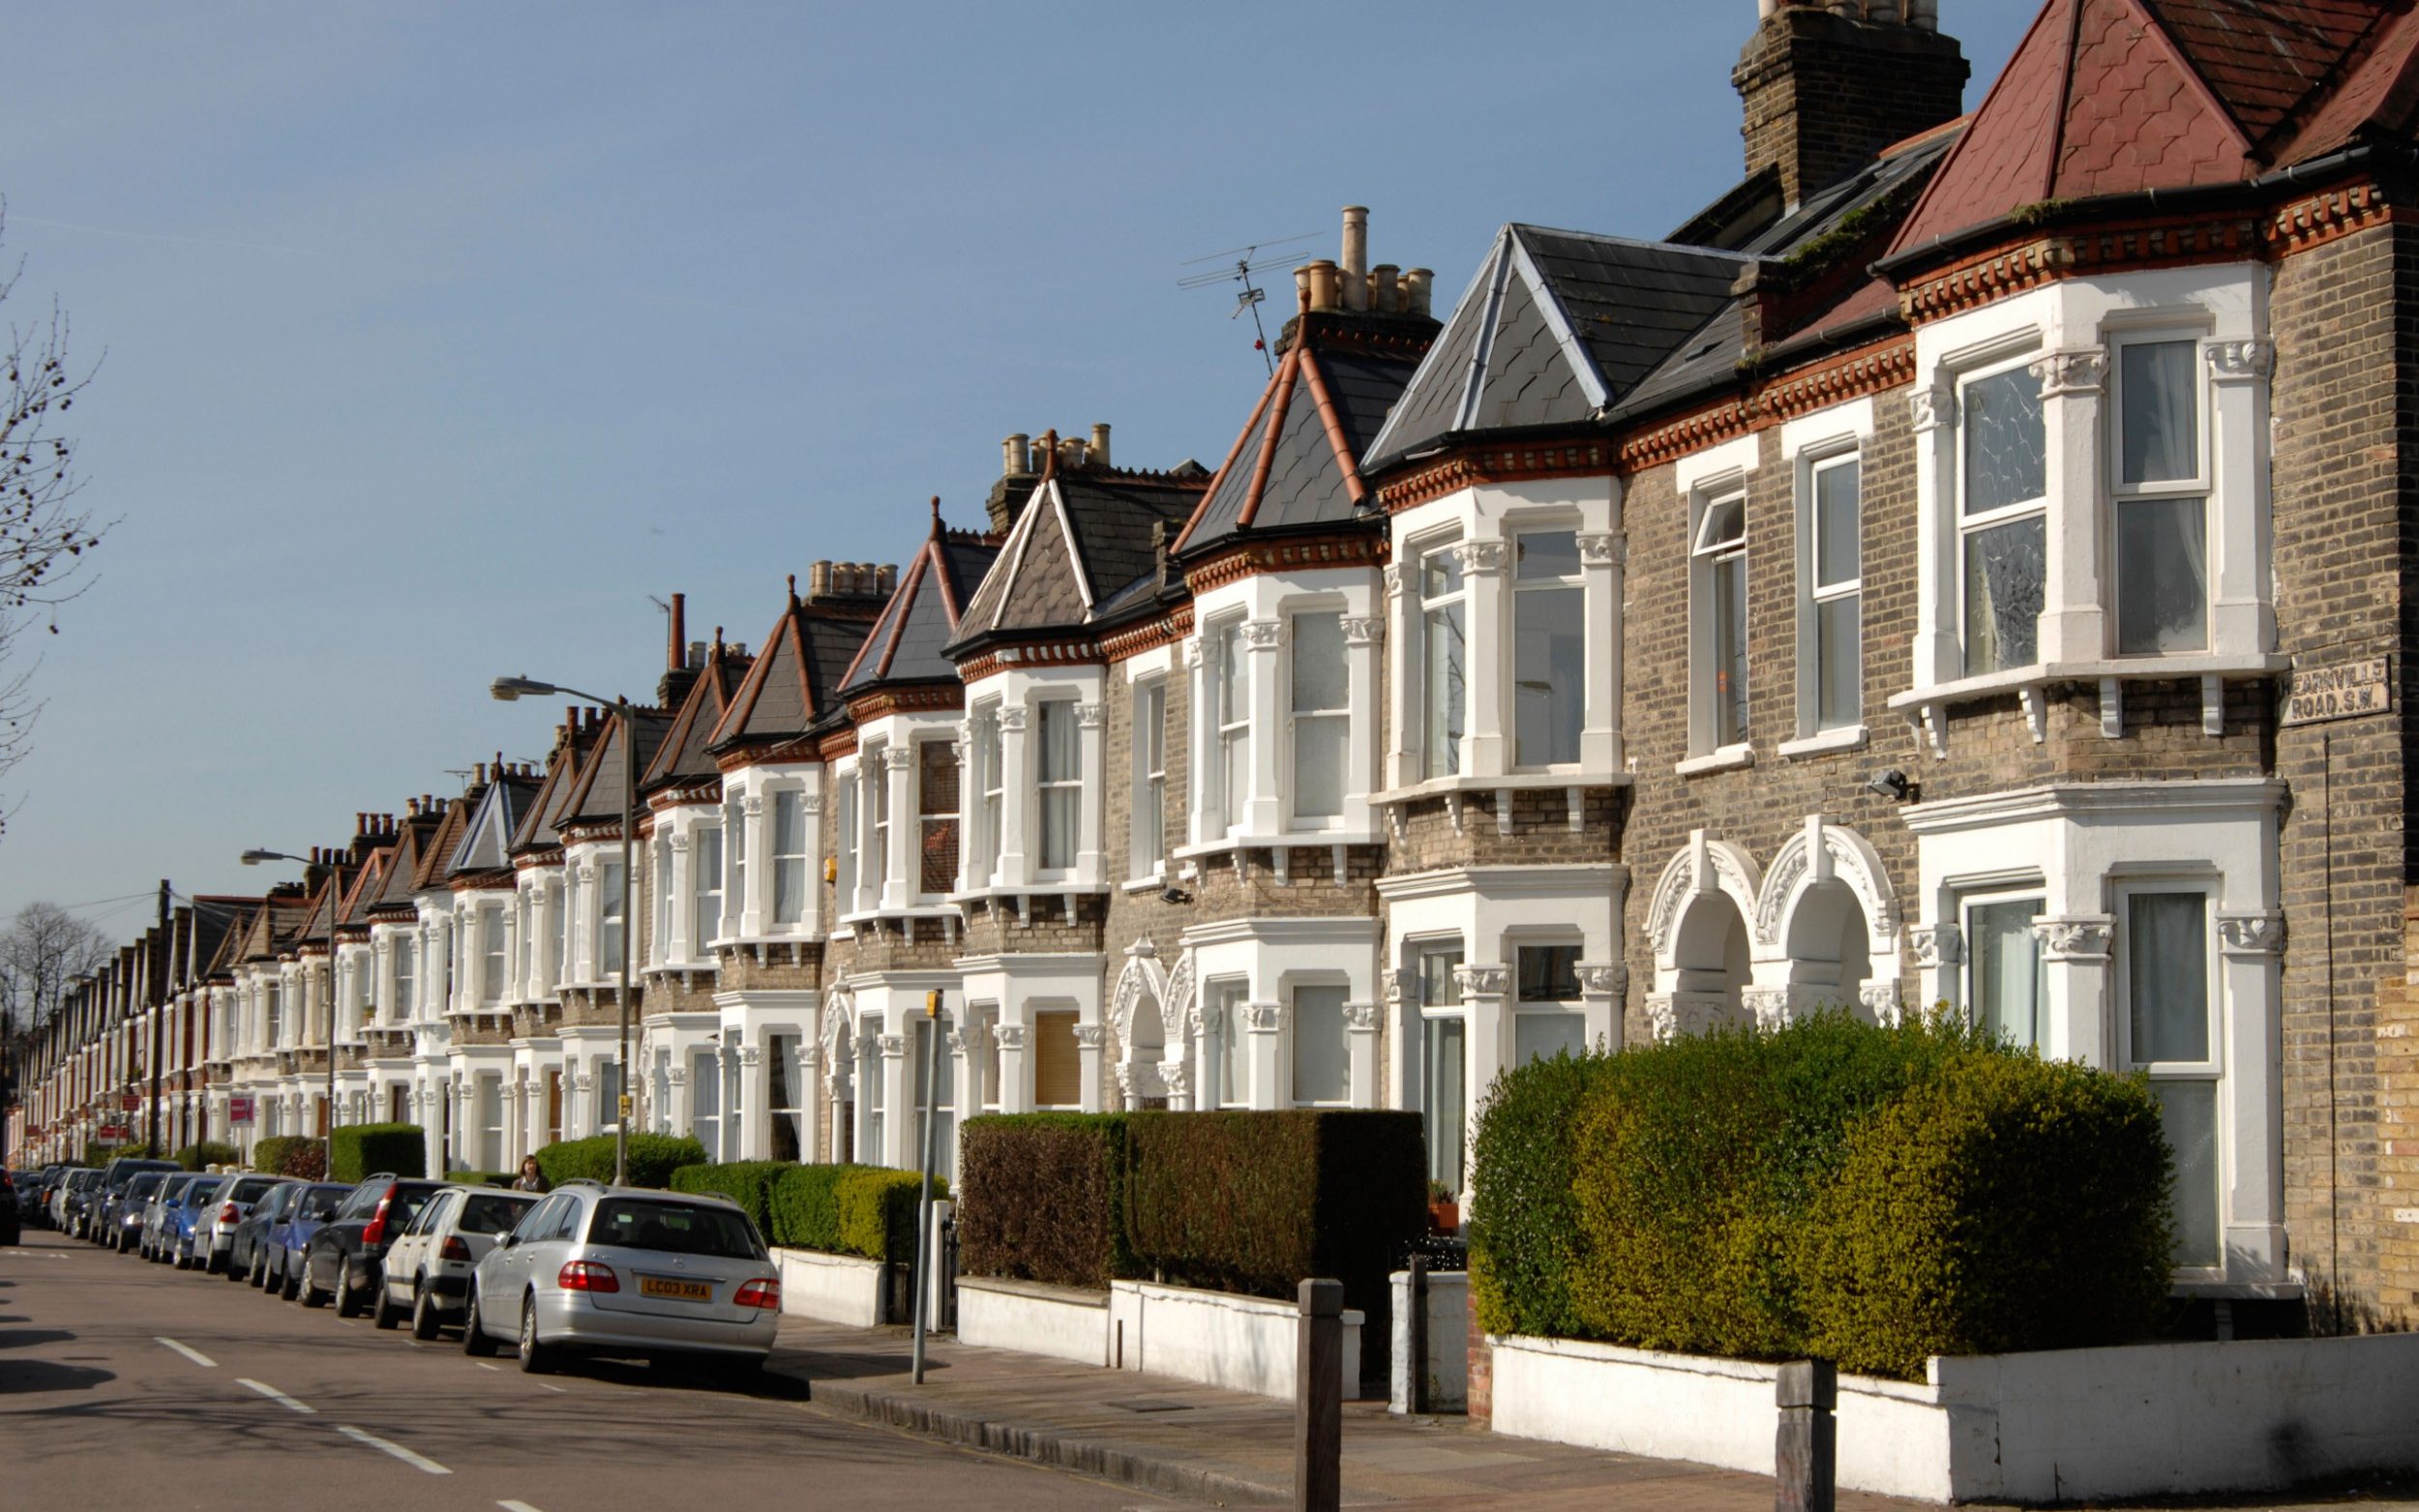 shared ownership traps house buyers in ‘unbearable reality’